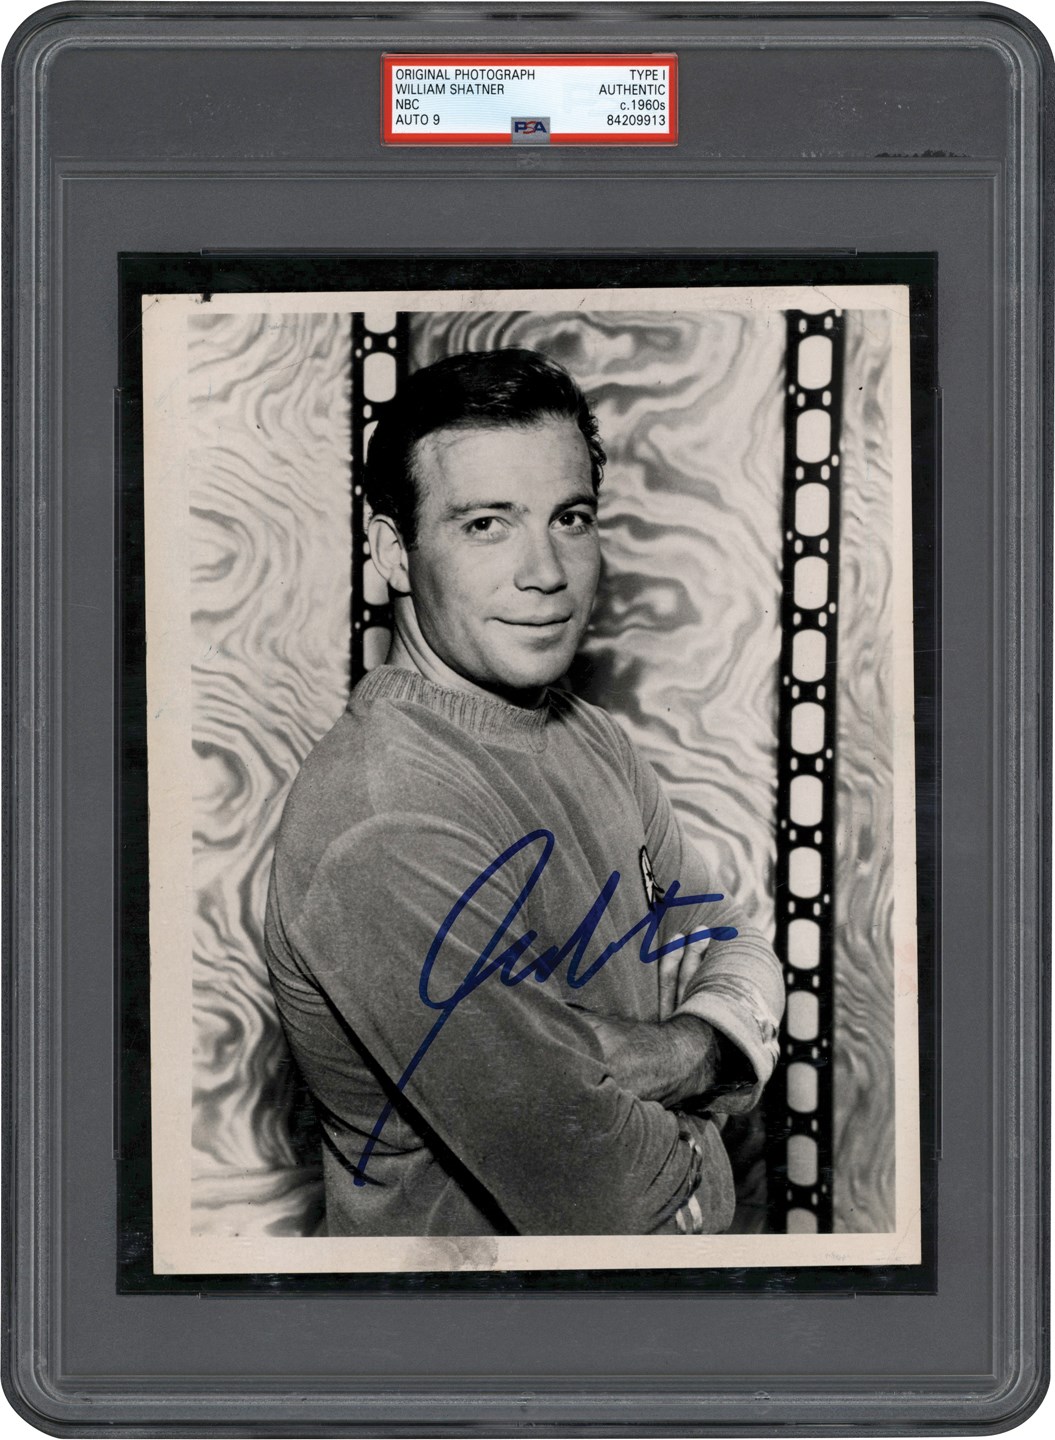 Rock And Pop Culture - The Very First Image of William Shatner as Captain Kirk Signed Original Photograph (PSA Type I)